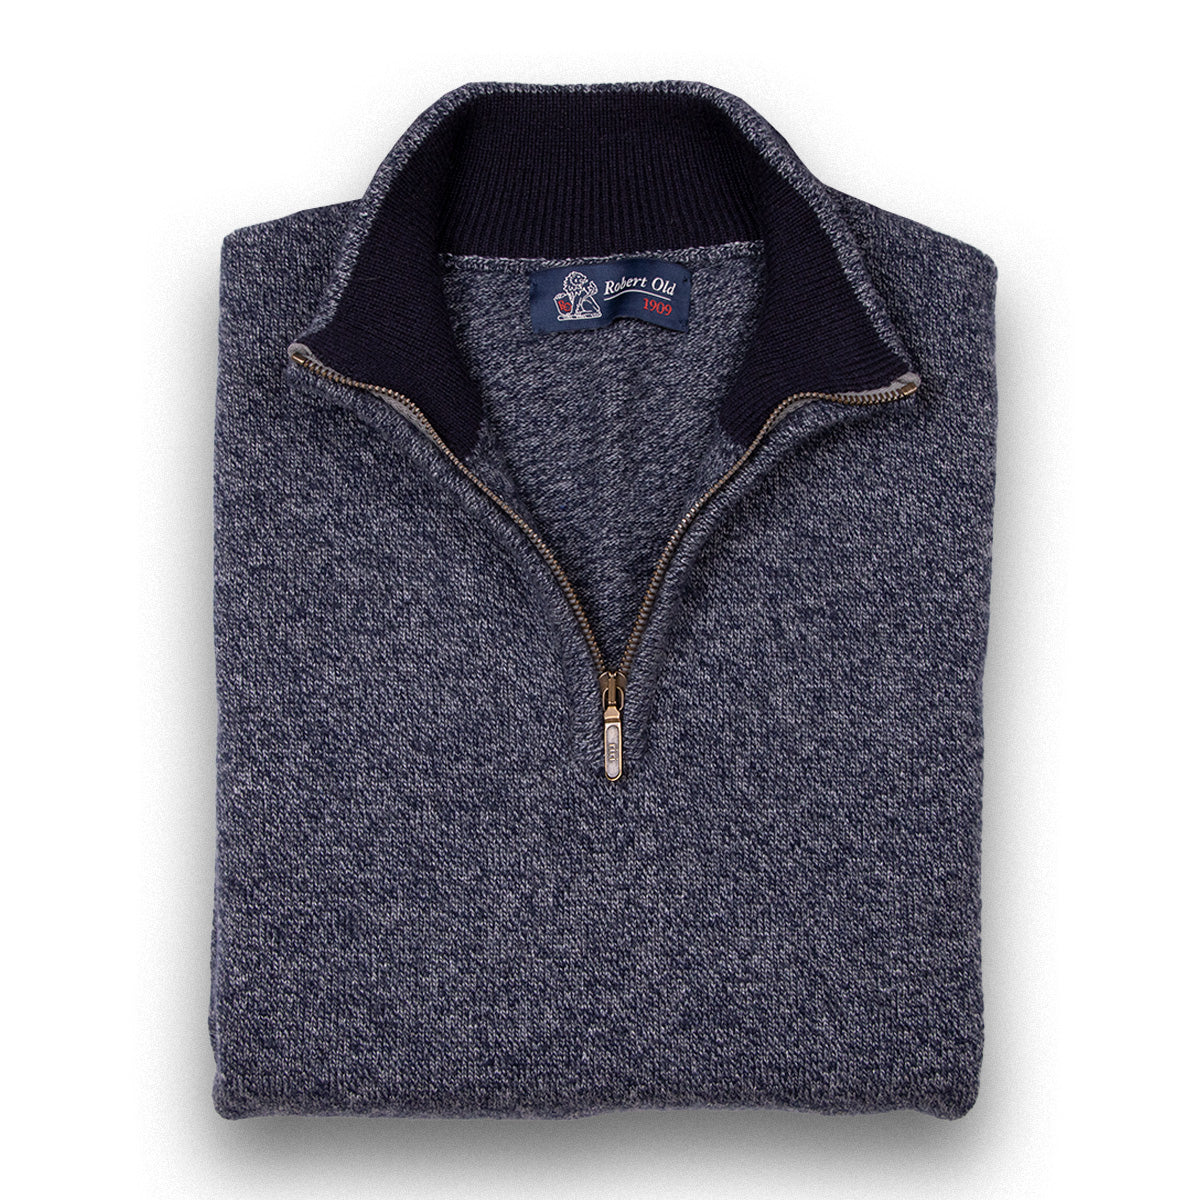 The Bowmore 1/4 Zip Neck Cashmere Sweater - Flannel / Navy  Robert Old Flannel - Navy UK 36" 